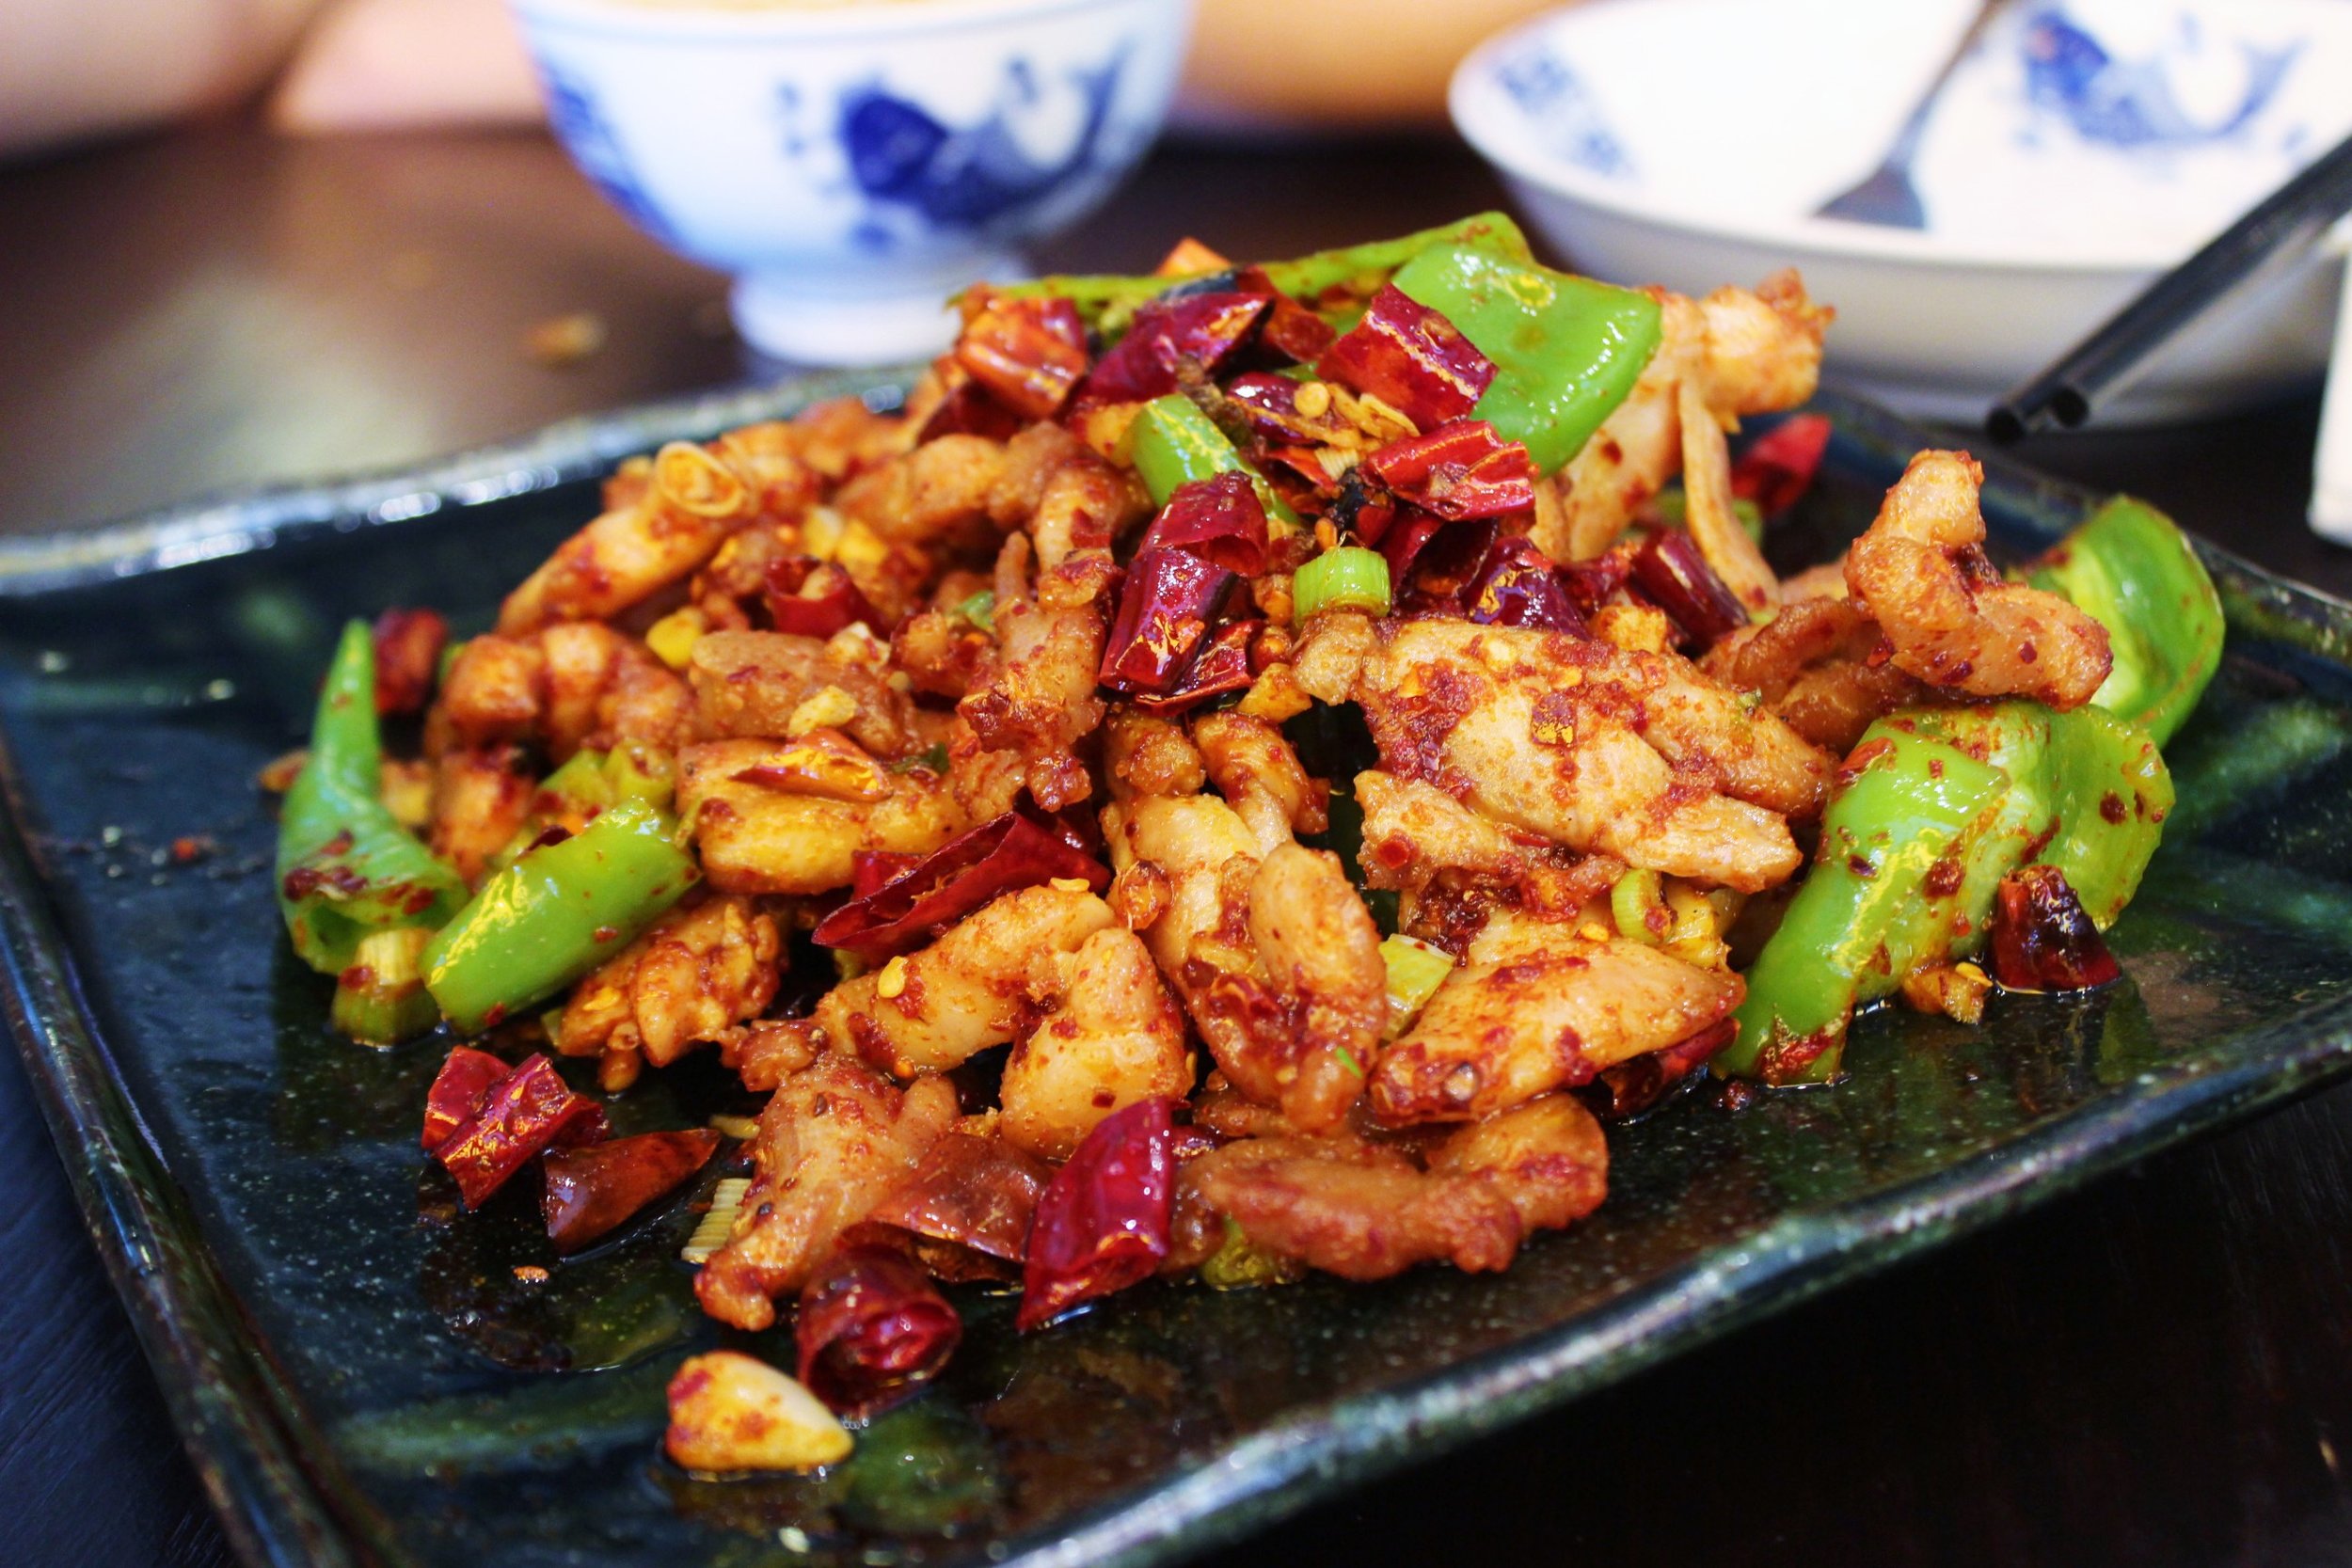 Three Pepper Chicken: Stir-friend with red and green chili peppers and peppercorn